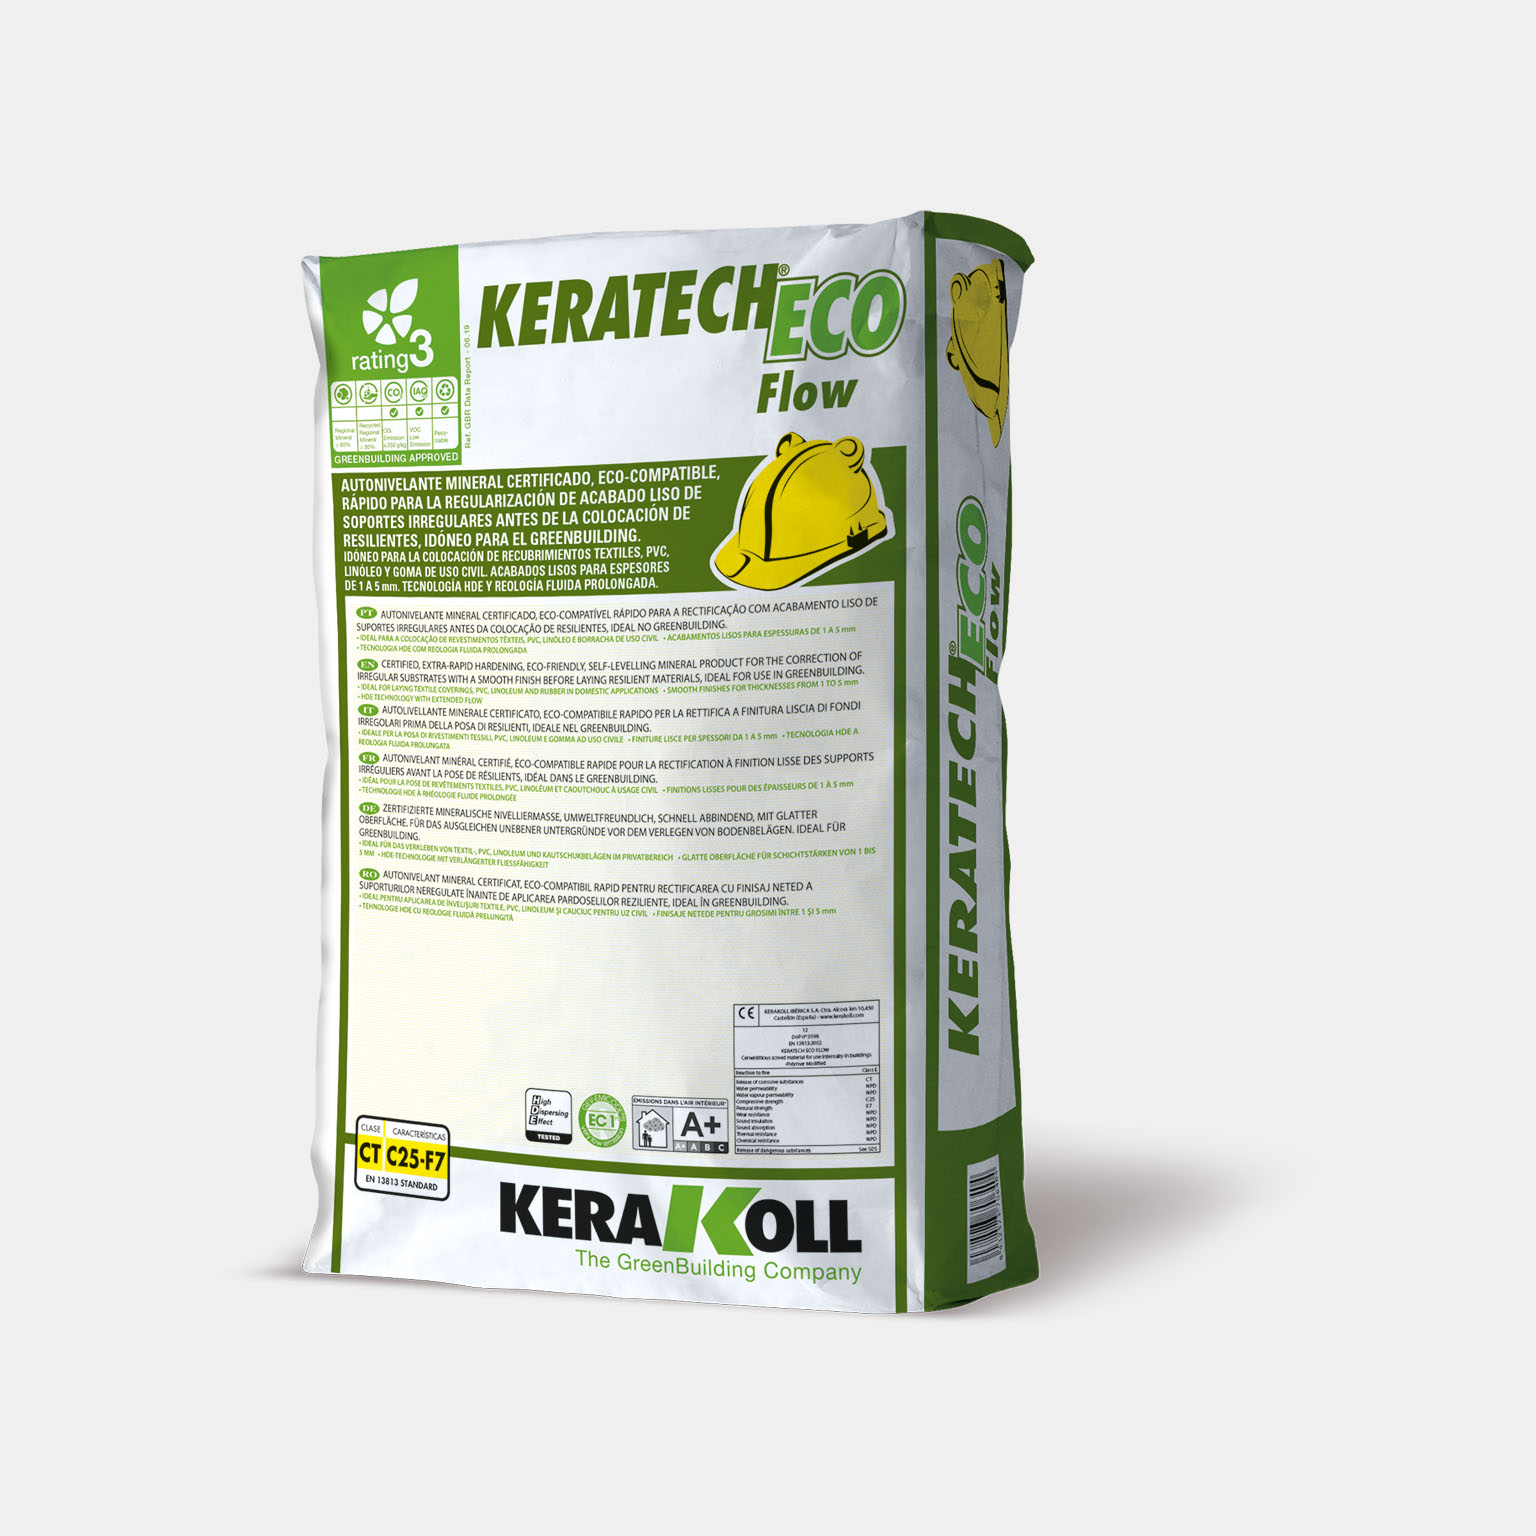 Keratech Eco Flow - immagine pack